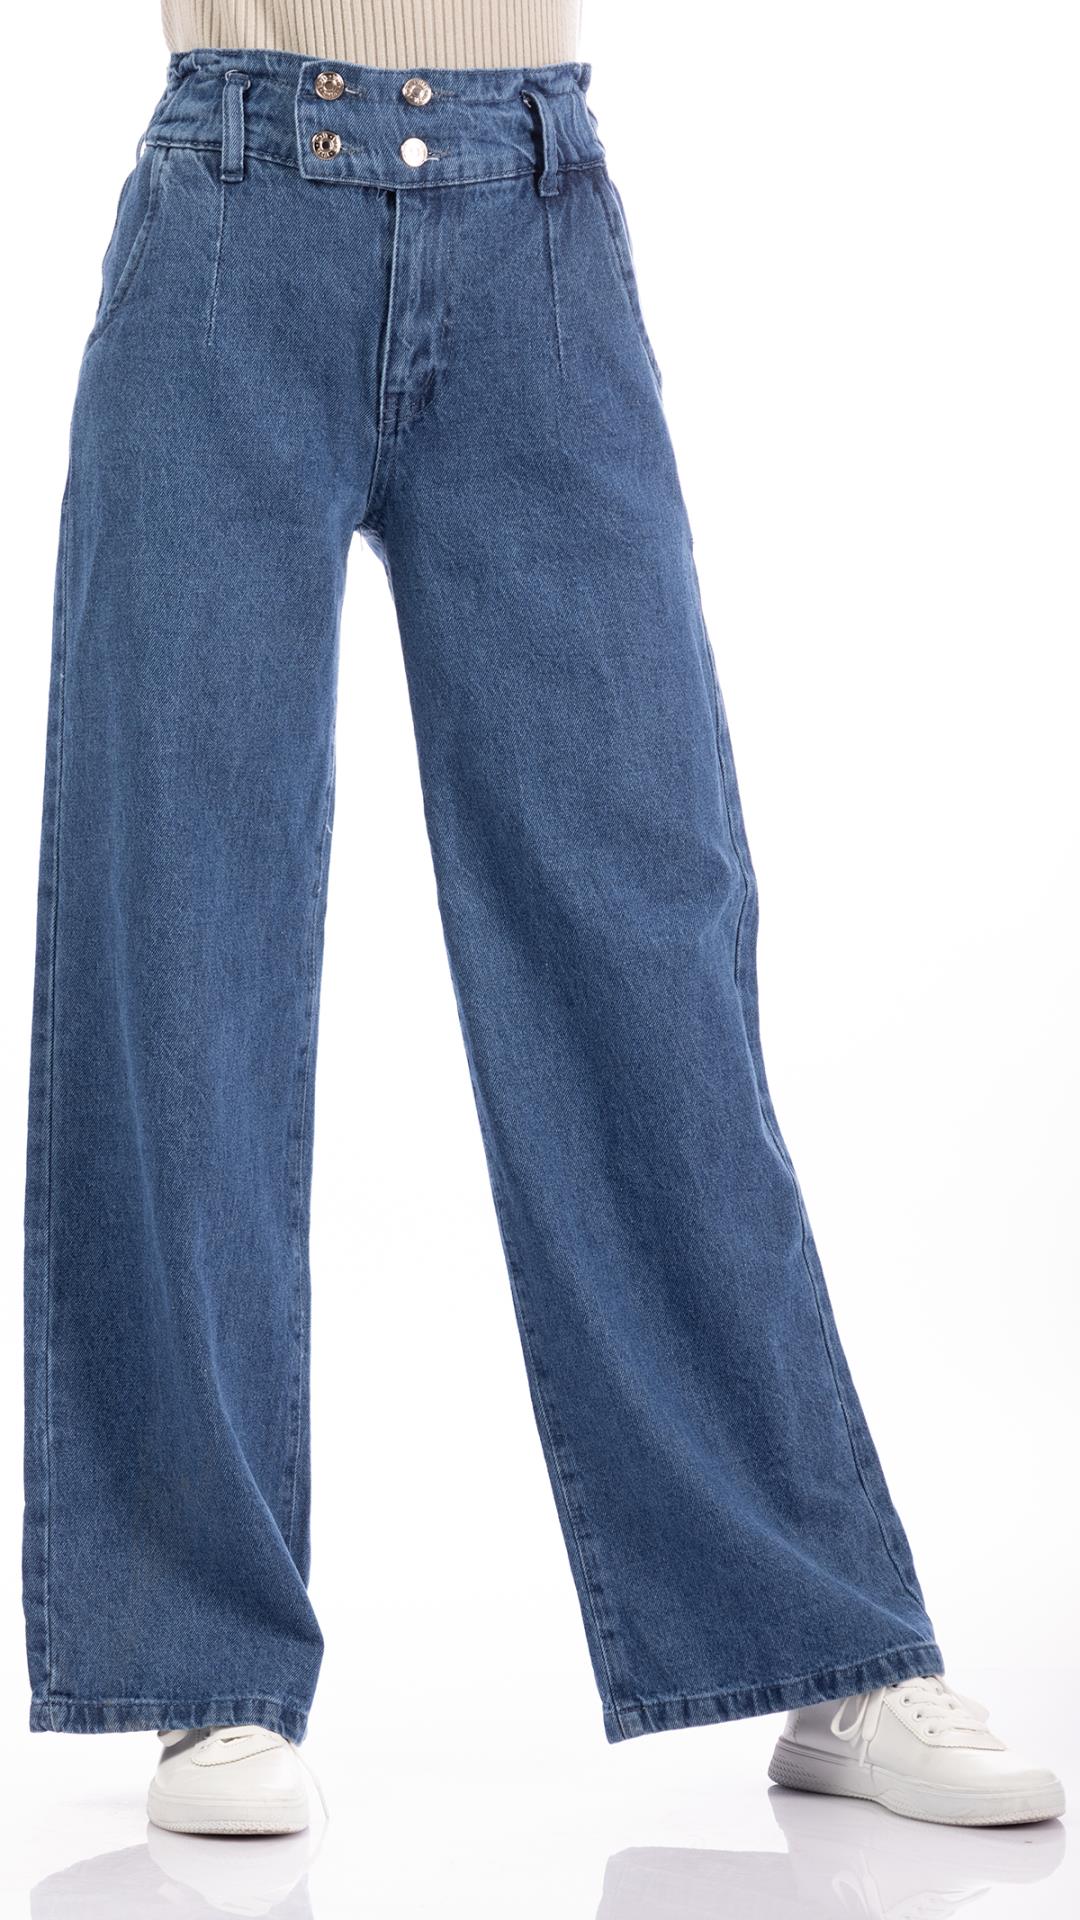 jeans with four buttons at the waist 